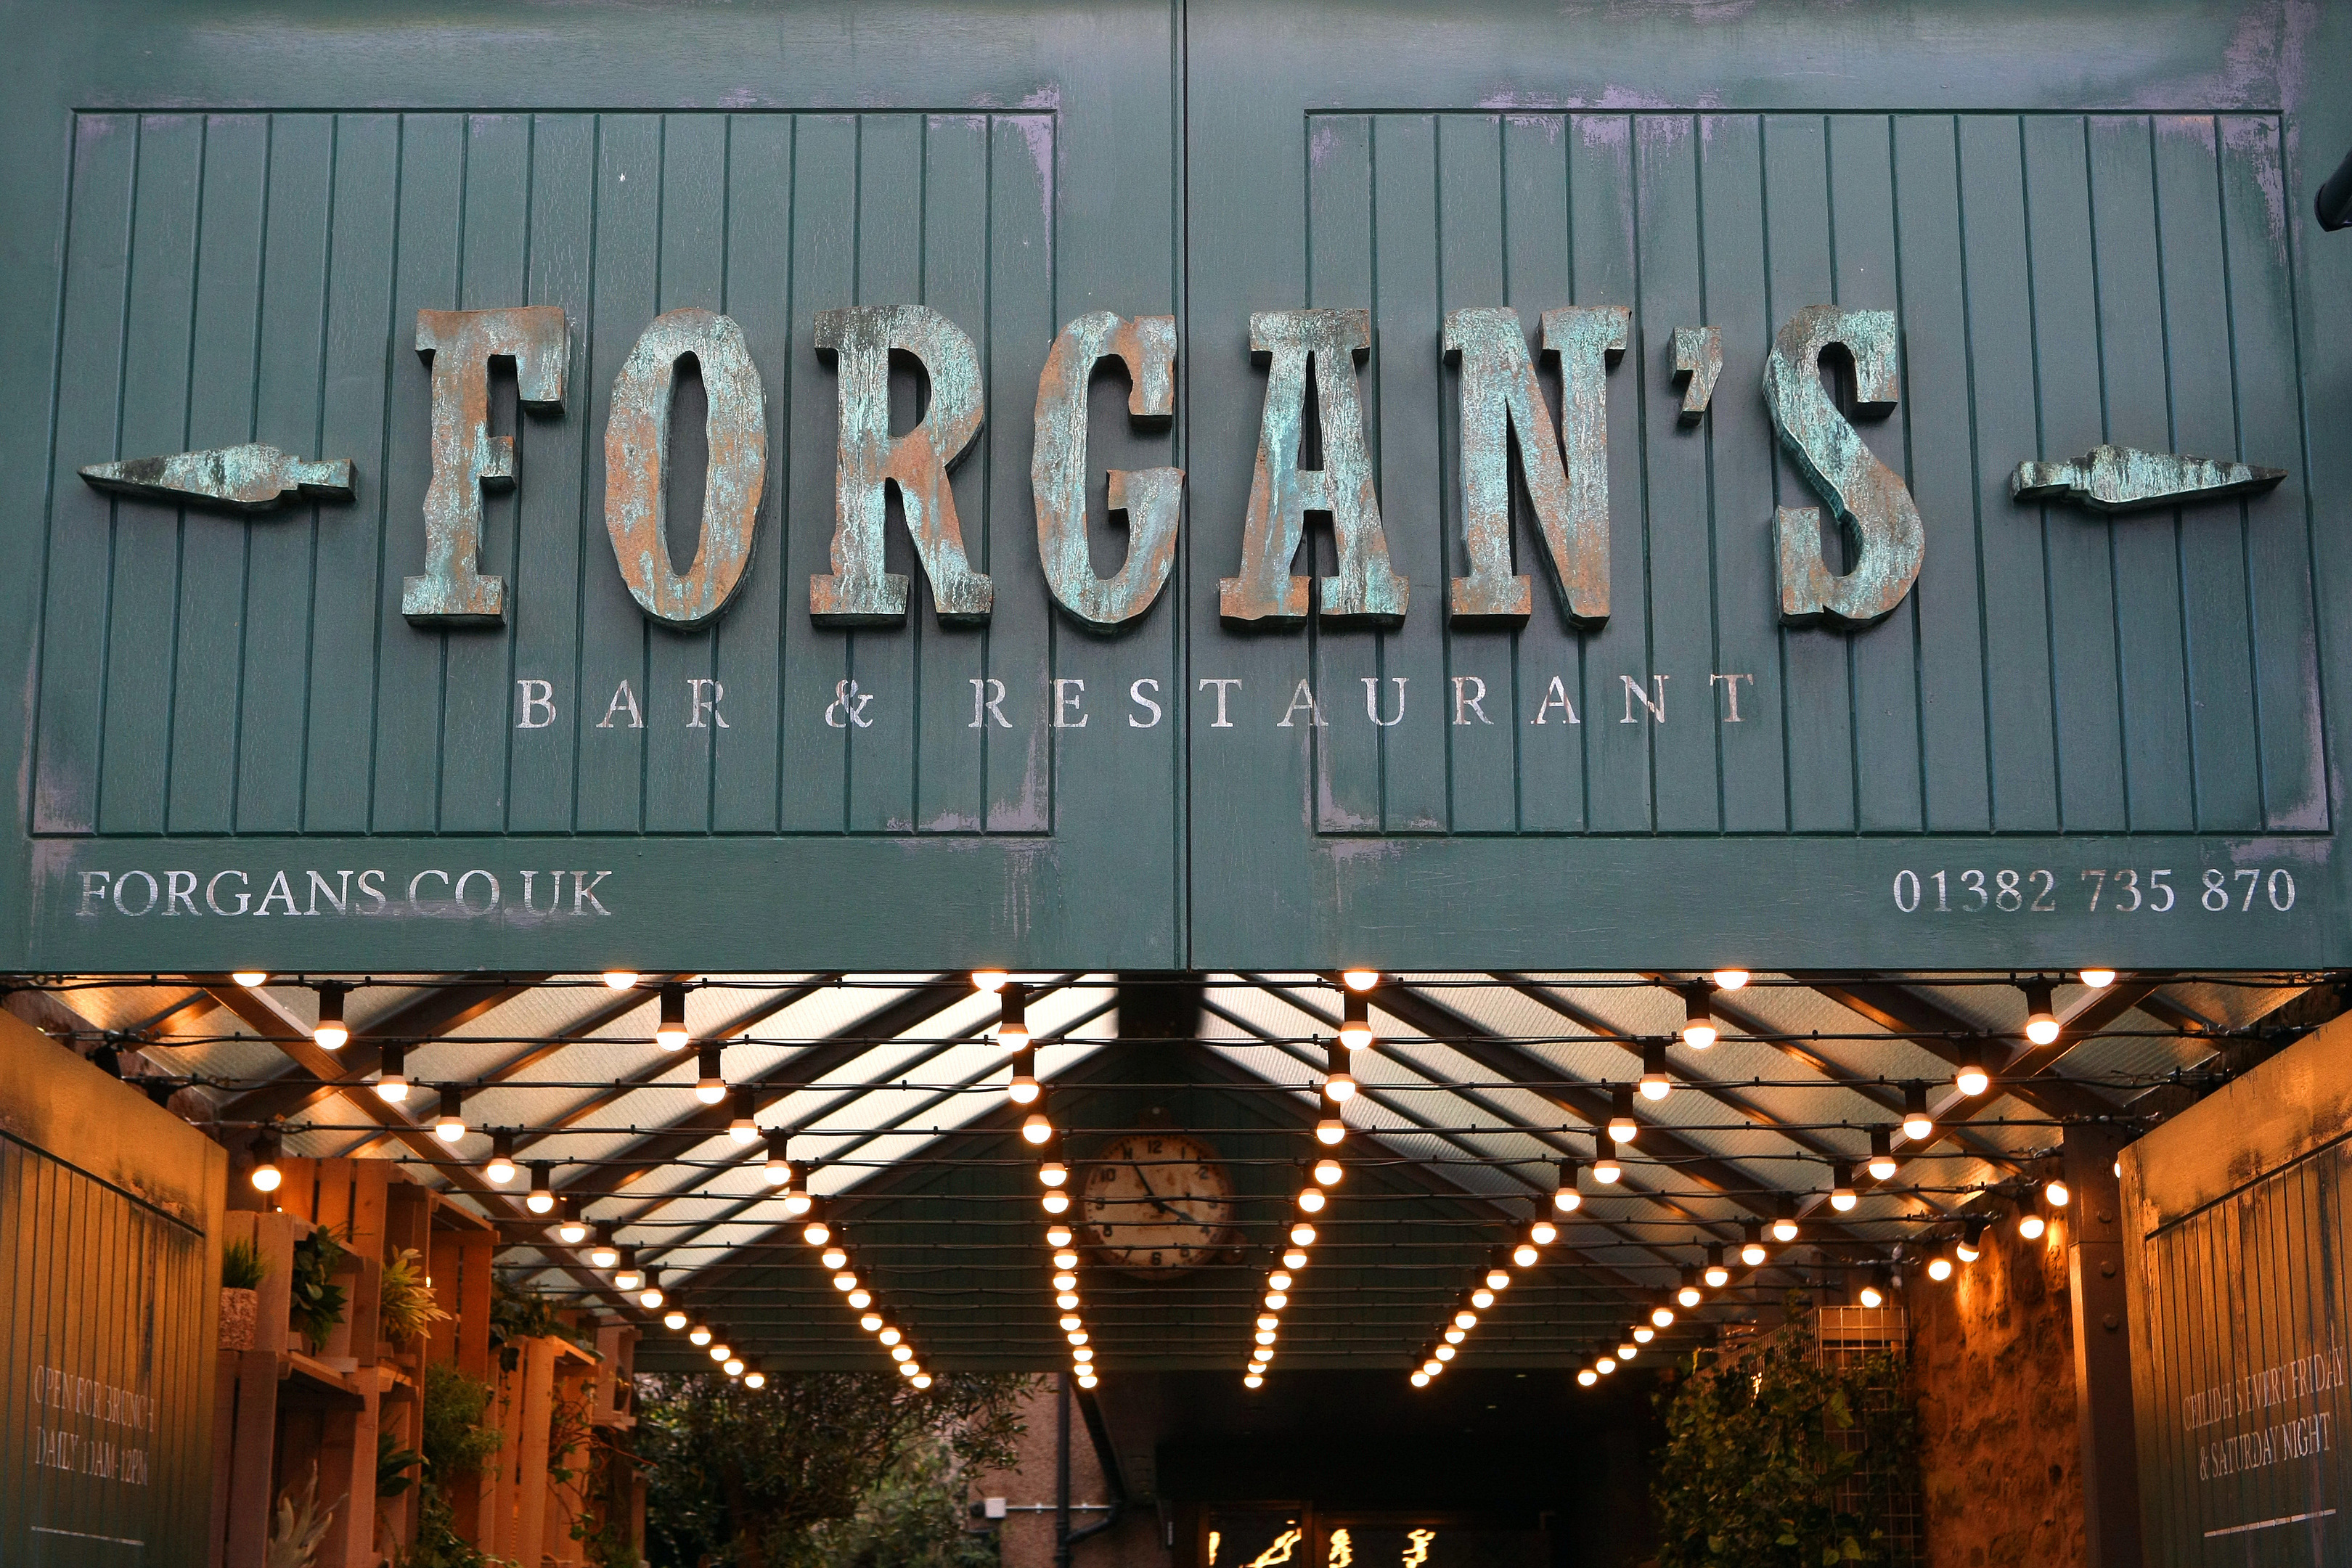 The owners of Forgan's have applied to open a new deli/cafe within a vacant unit.